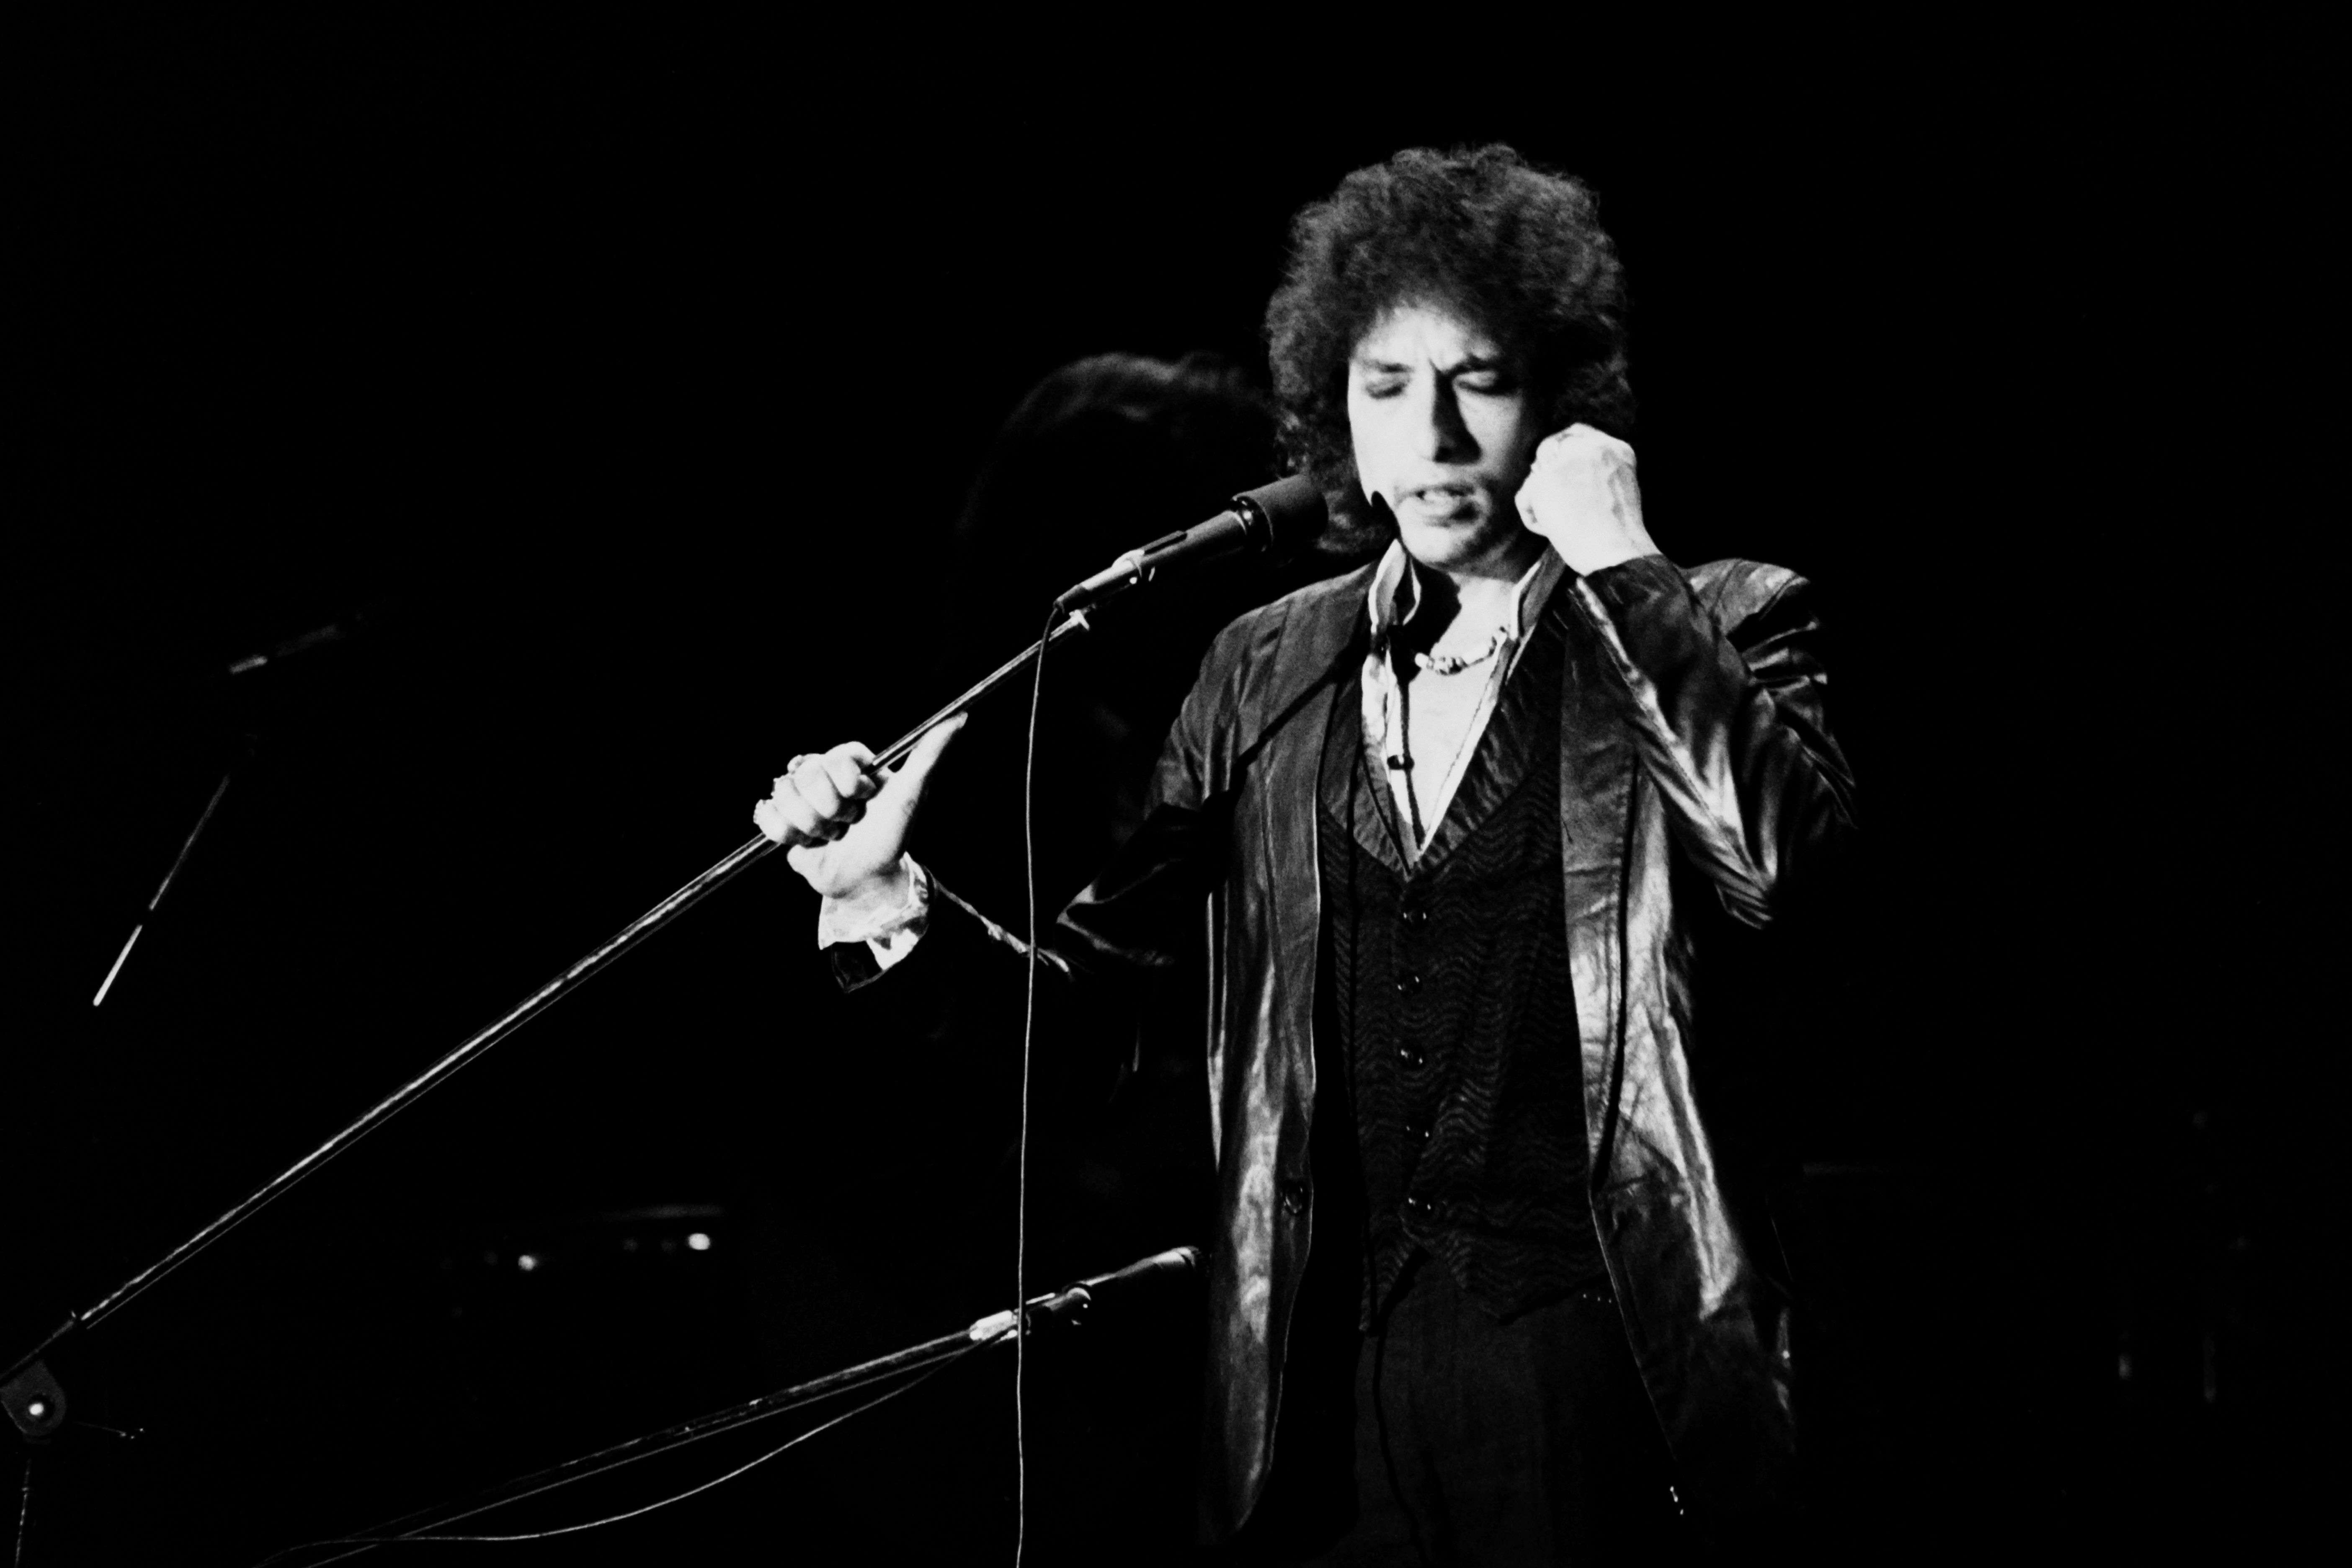 (FILES) This file photo taken on on July 4, 1978 shows US poet and folk singer Bob Dylan performing in Paris. US songwriter Bob Dylan won the Nobel Literature Prize on October 13, 2016, the first songwriter to win the prestigious award and an announcement that surprised prize watchers. / AFP PHOTO / PIERRE GUILLAUD